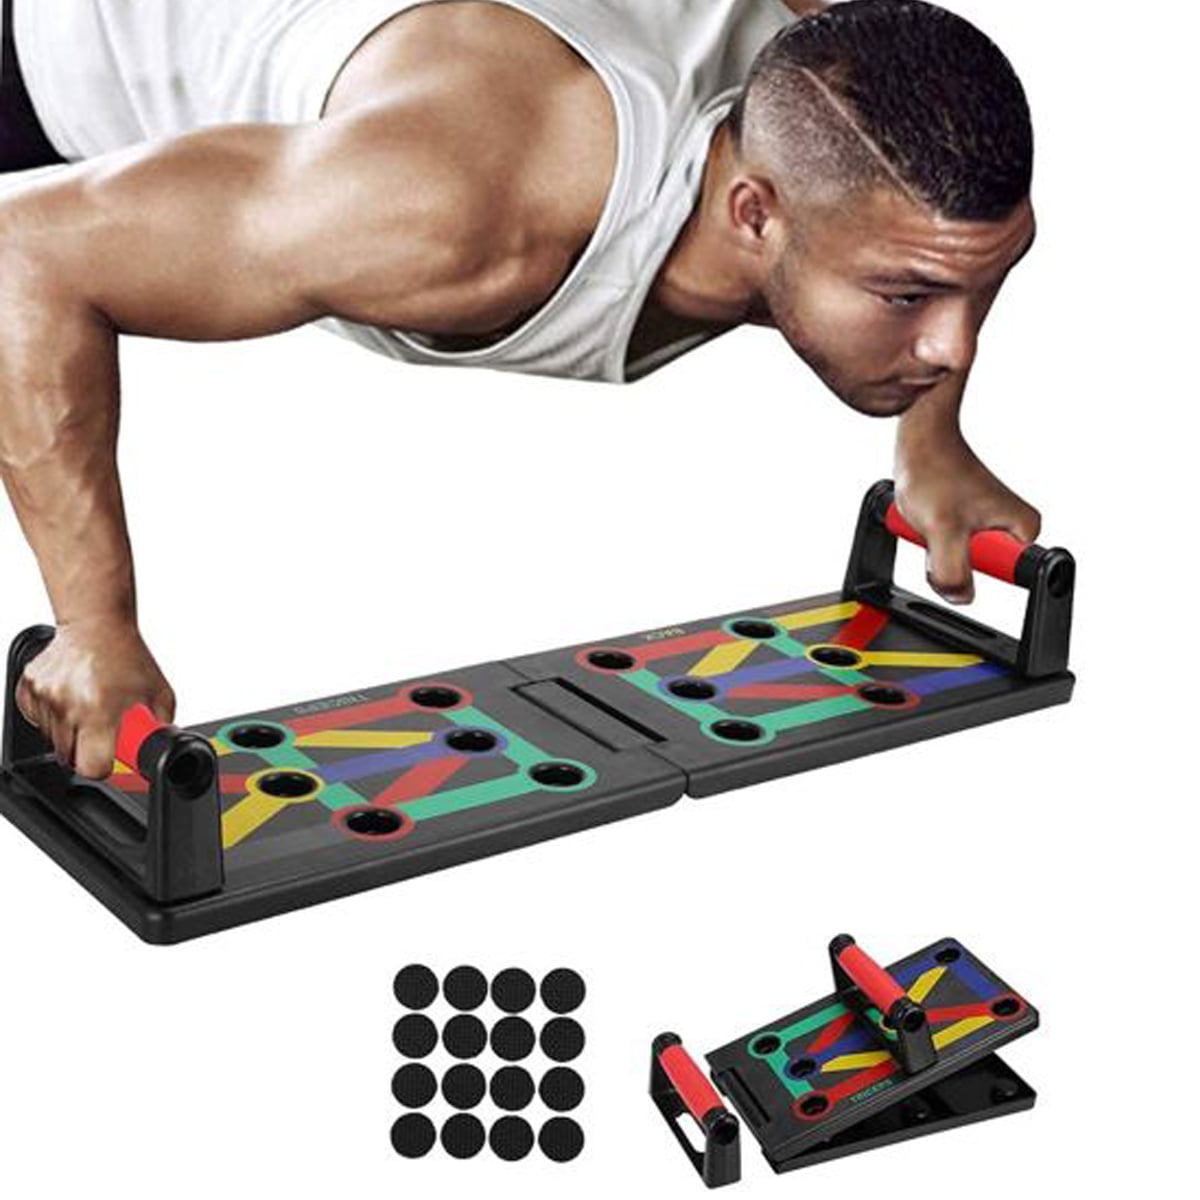 Details about   13-in-1 Digital Counting Push-up Rack Training Board Muscle Workout Fitness Tool 